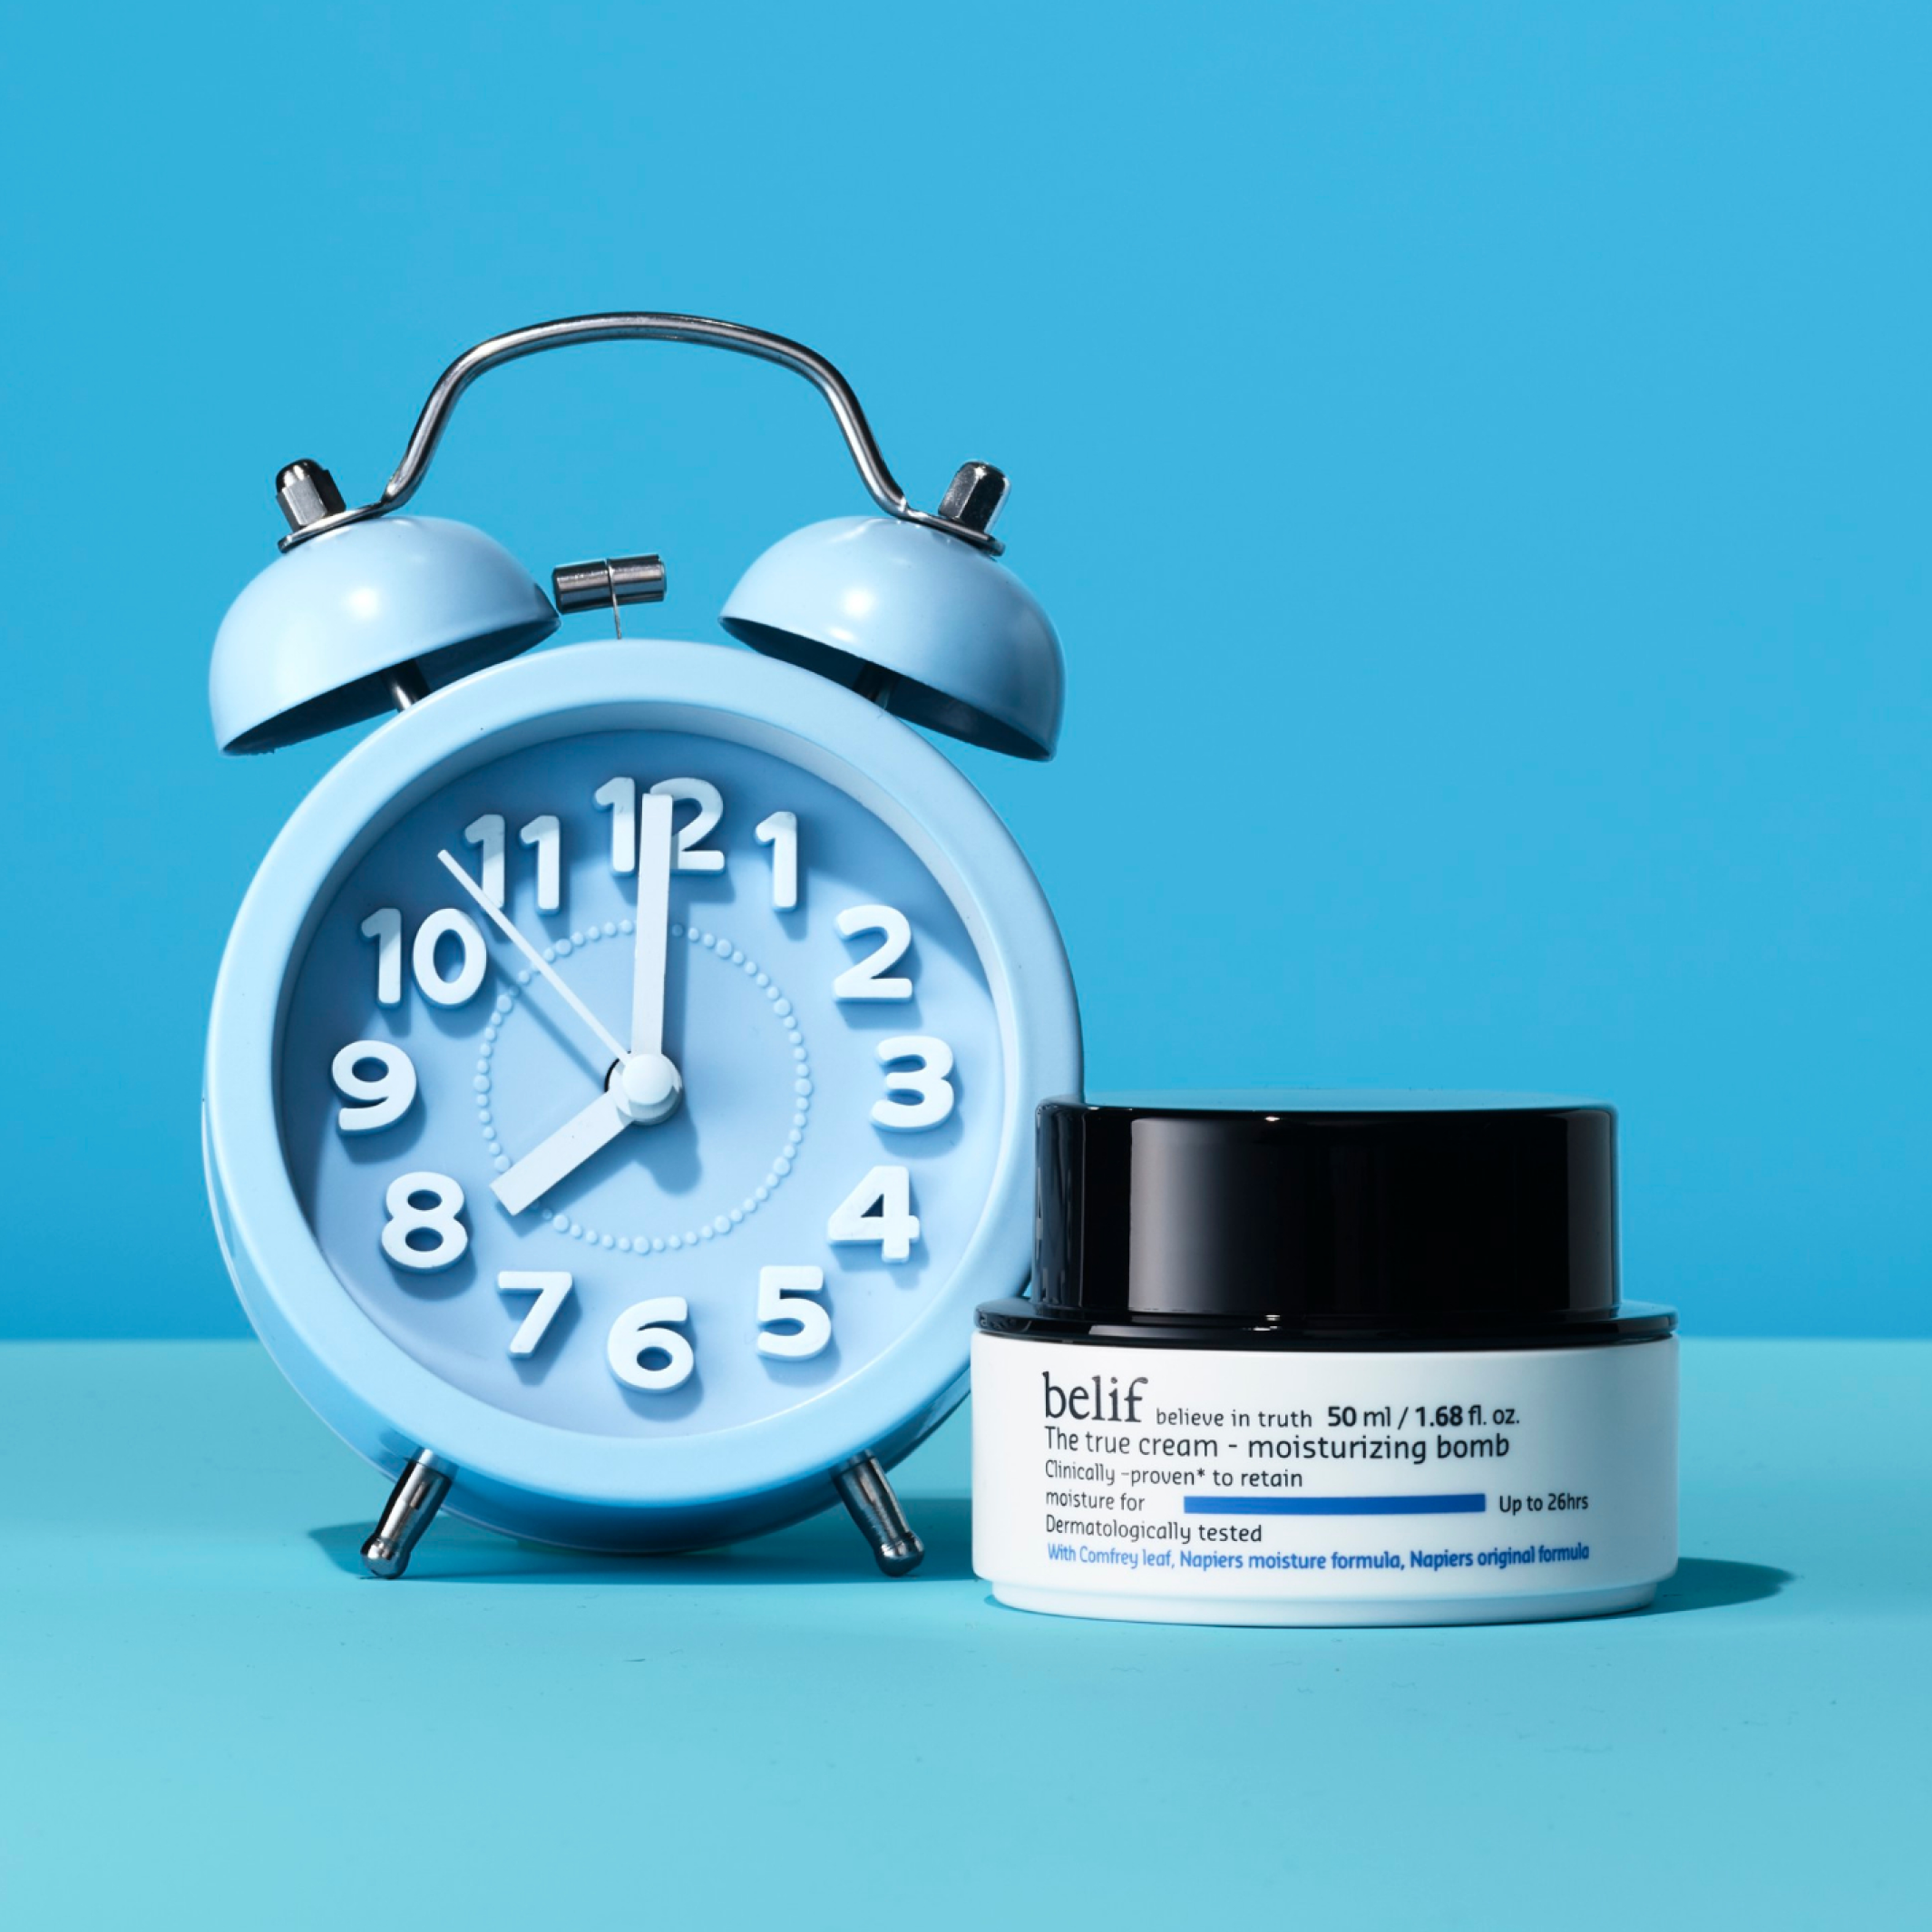 A jar of belif The True Cream Moisturizing Bomb standing on a light blue surface with a blue analog alarm clock standing by its side.